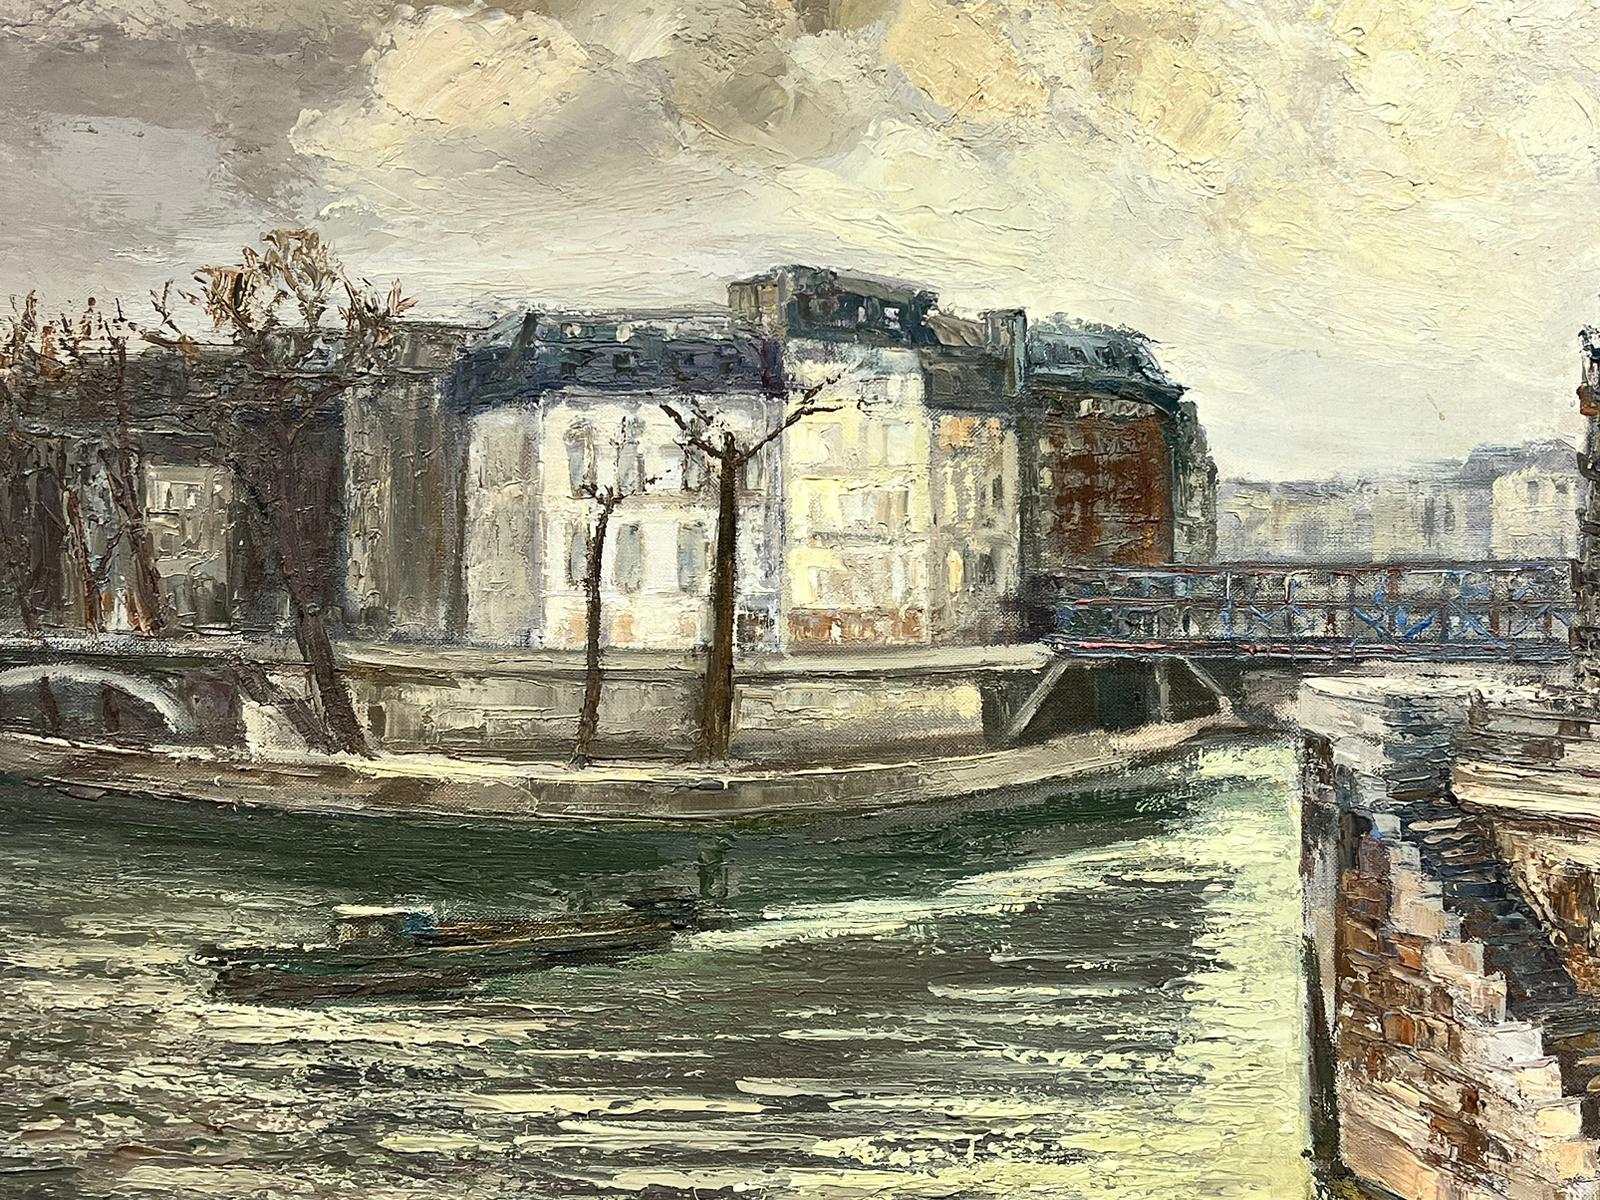 Paris
by Josine Vignon (French 1922-2022)
signed 
oil painting on canvas, framed
framed: 31 x 35 inches
canvas: 25 x 29 inches

Colors: Green colors, beige, blue and grey

Very good condition

Provenance: from the artists estate, France

Josine